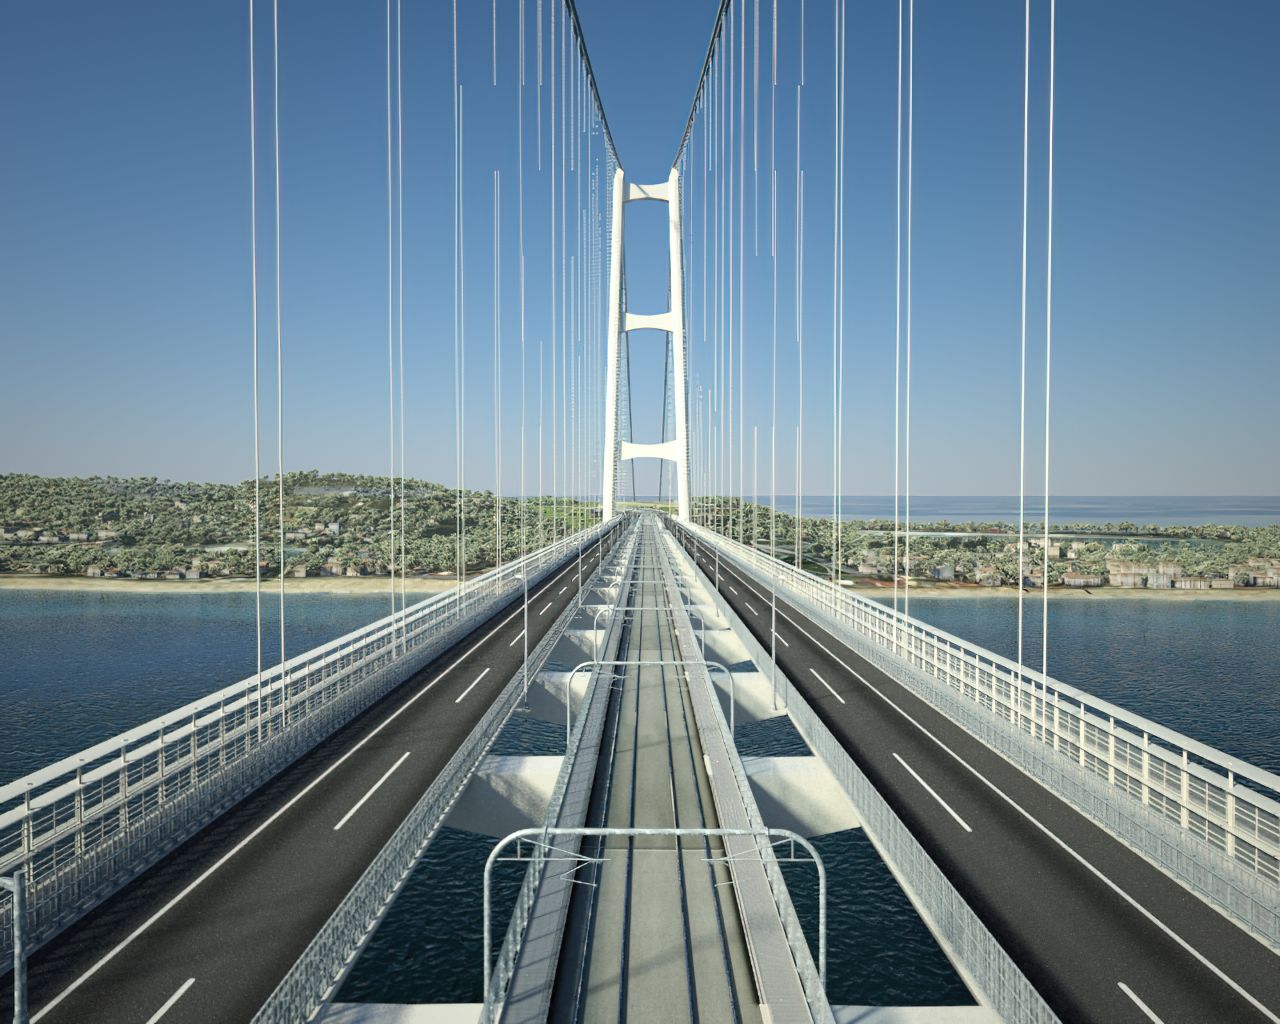 WeBuild have issued renderings of Brthe proposed bridge over the Strait of Messina.